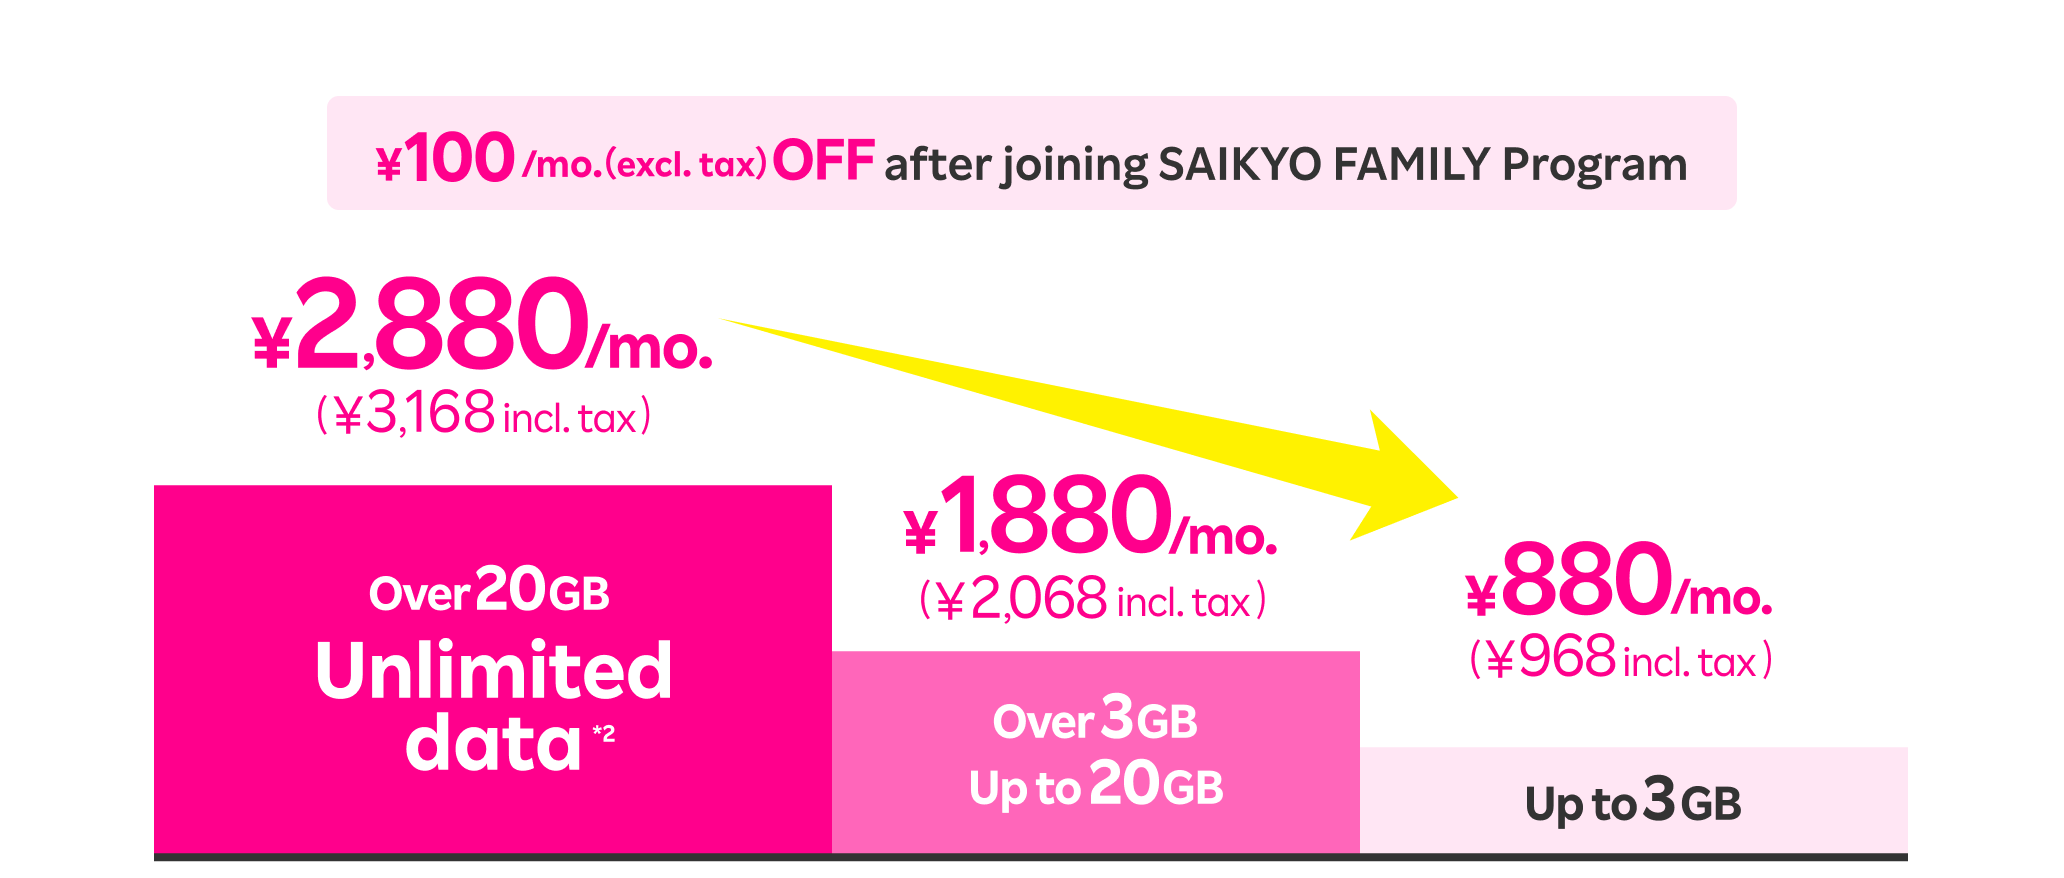 With the family discount applied, 880 yen/mo. (968 yen incl. tax) for up to 3GB or 2,880 yen/mo. (3,168 yen incl. tax) for unlimited high-speed data.